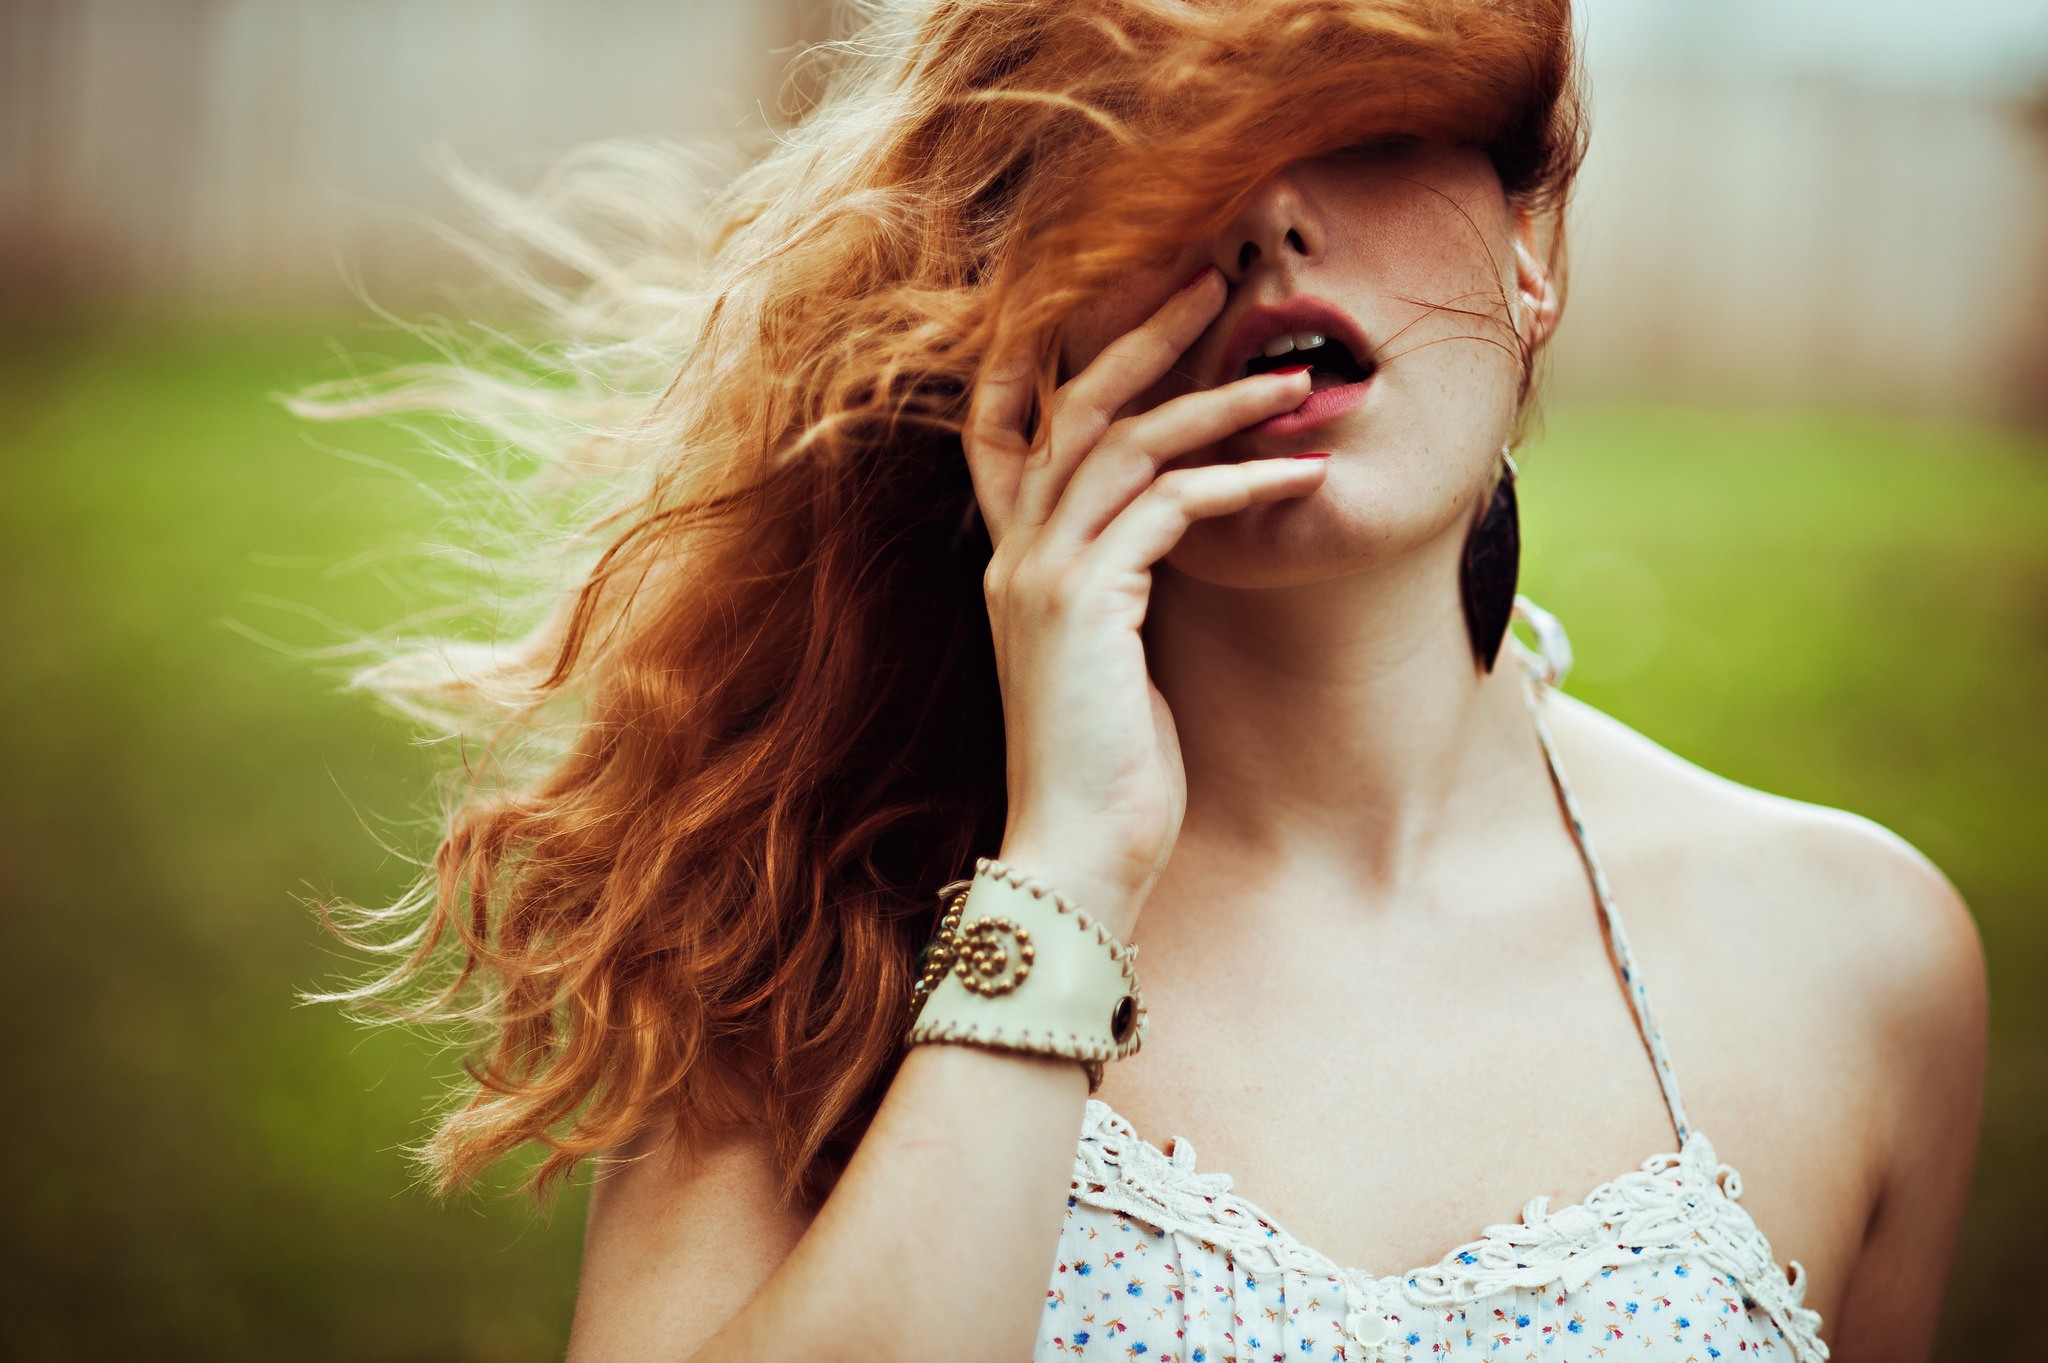 Women Redhead Hair In Face Finger On Lips Open Mouth Covered Eyes Summer Dress Windy Women Outdoors 2048x1363